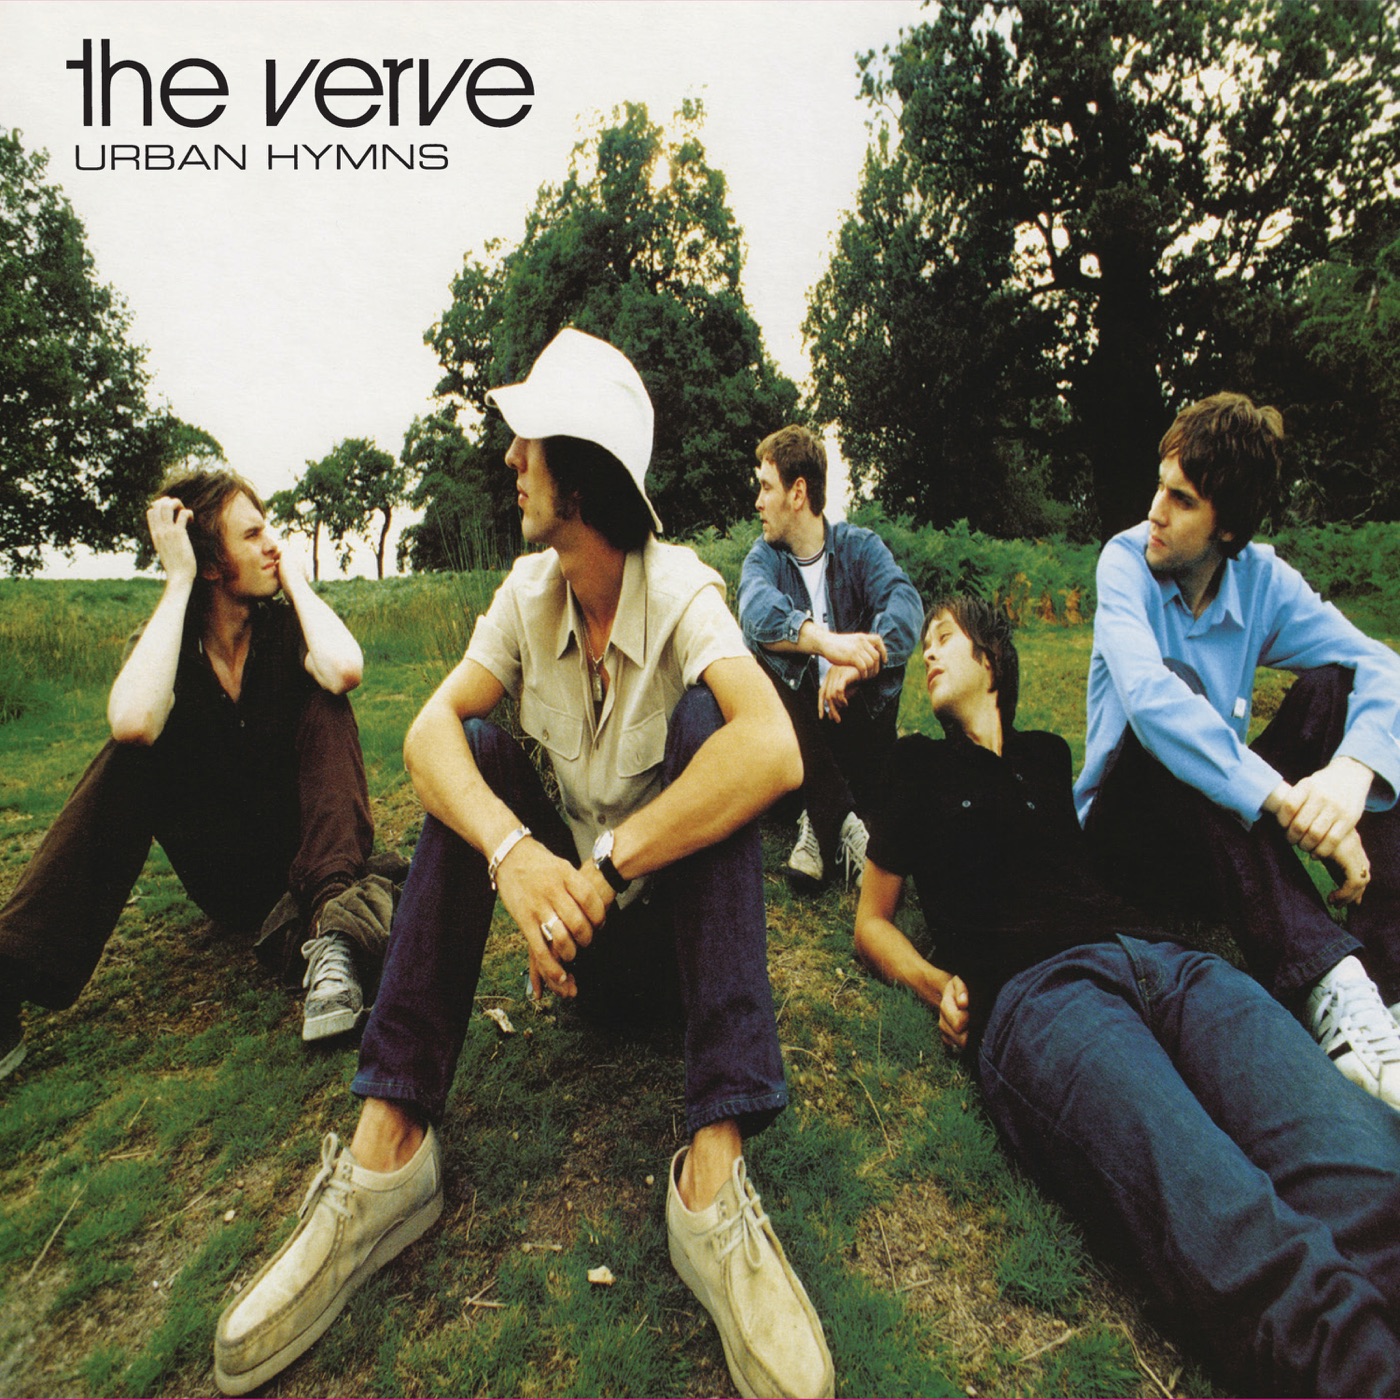 Urban Hymns (Remastered 2016) by The Verve